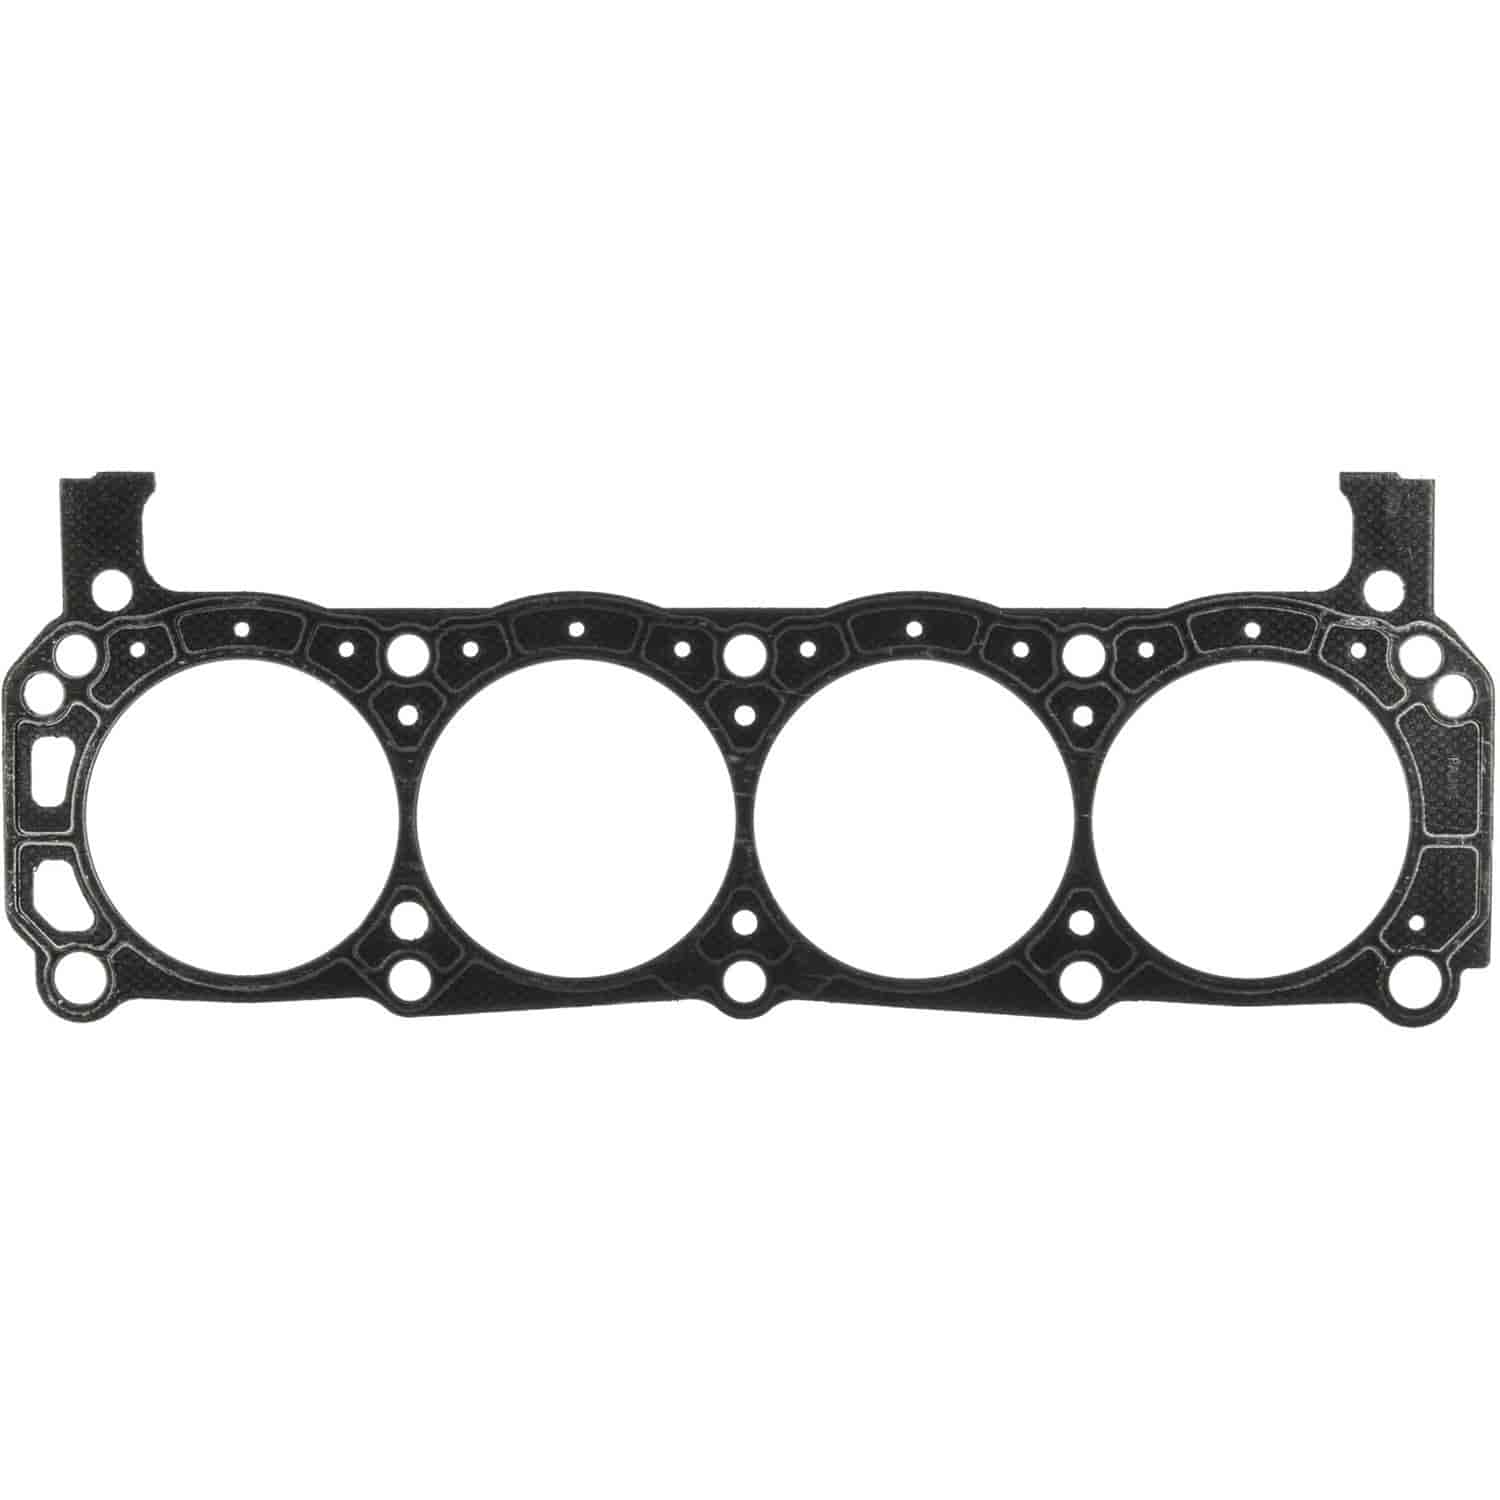 Performance Head Gasket Ford-Pass&Trk 260 289 302 Exc.Boss 351W 62-94